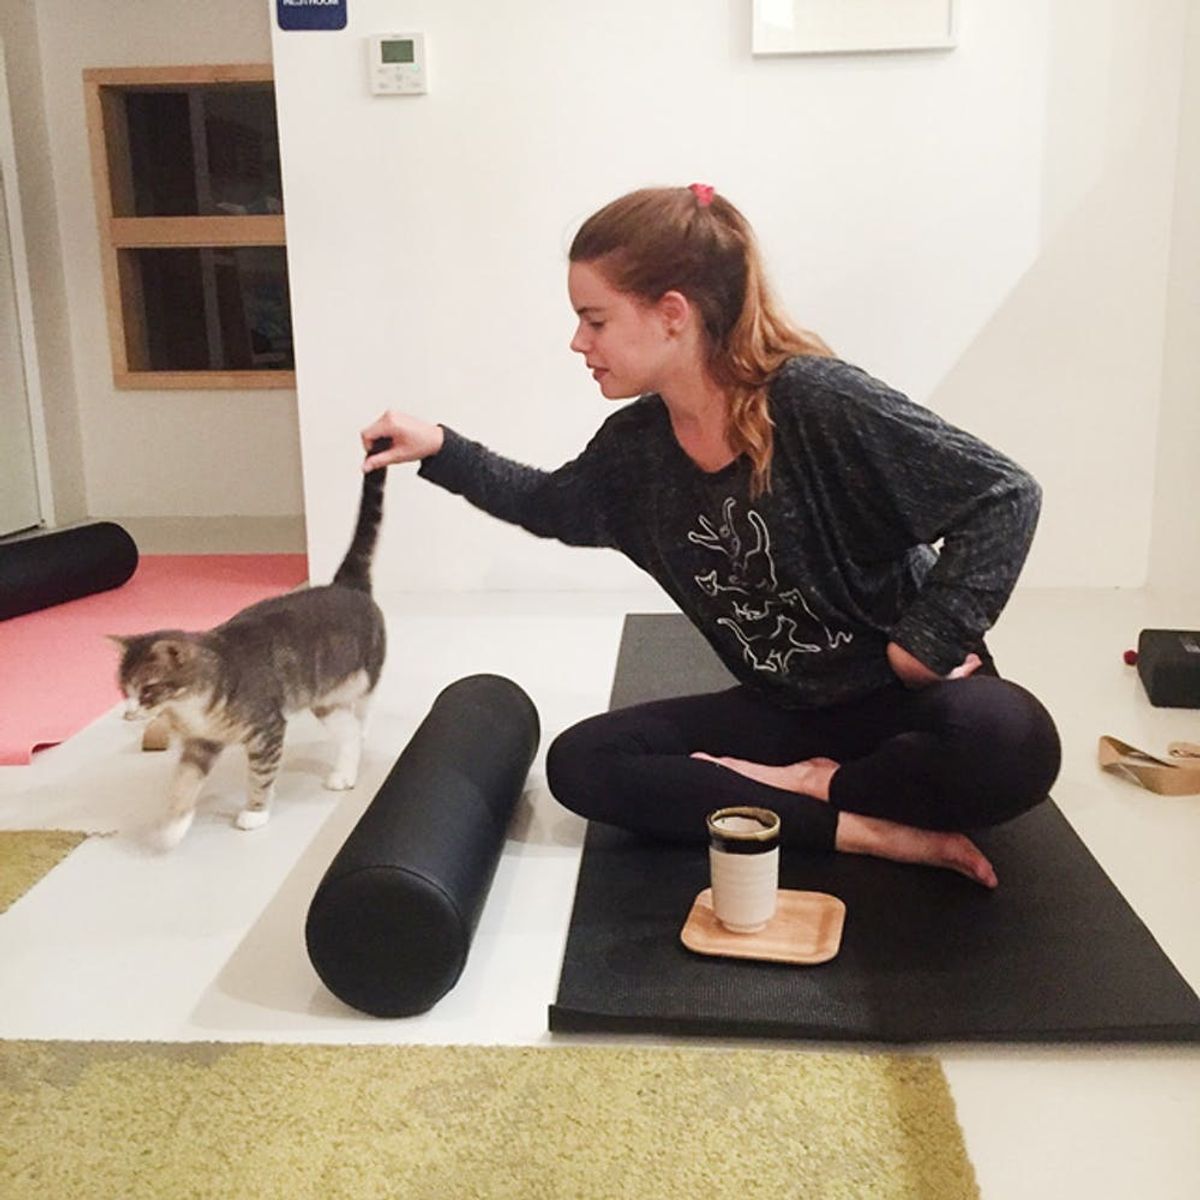 I Went to a Cat Yoga Class. This Is What Happened.